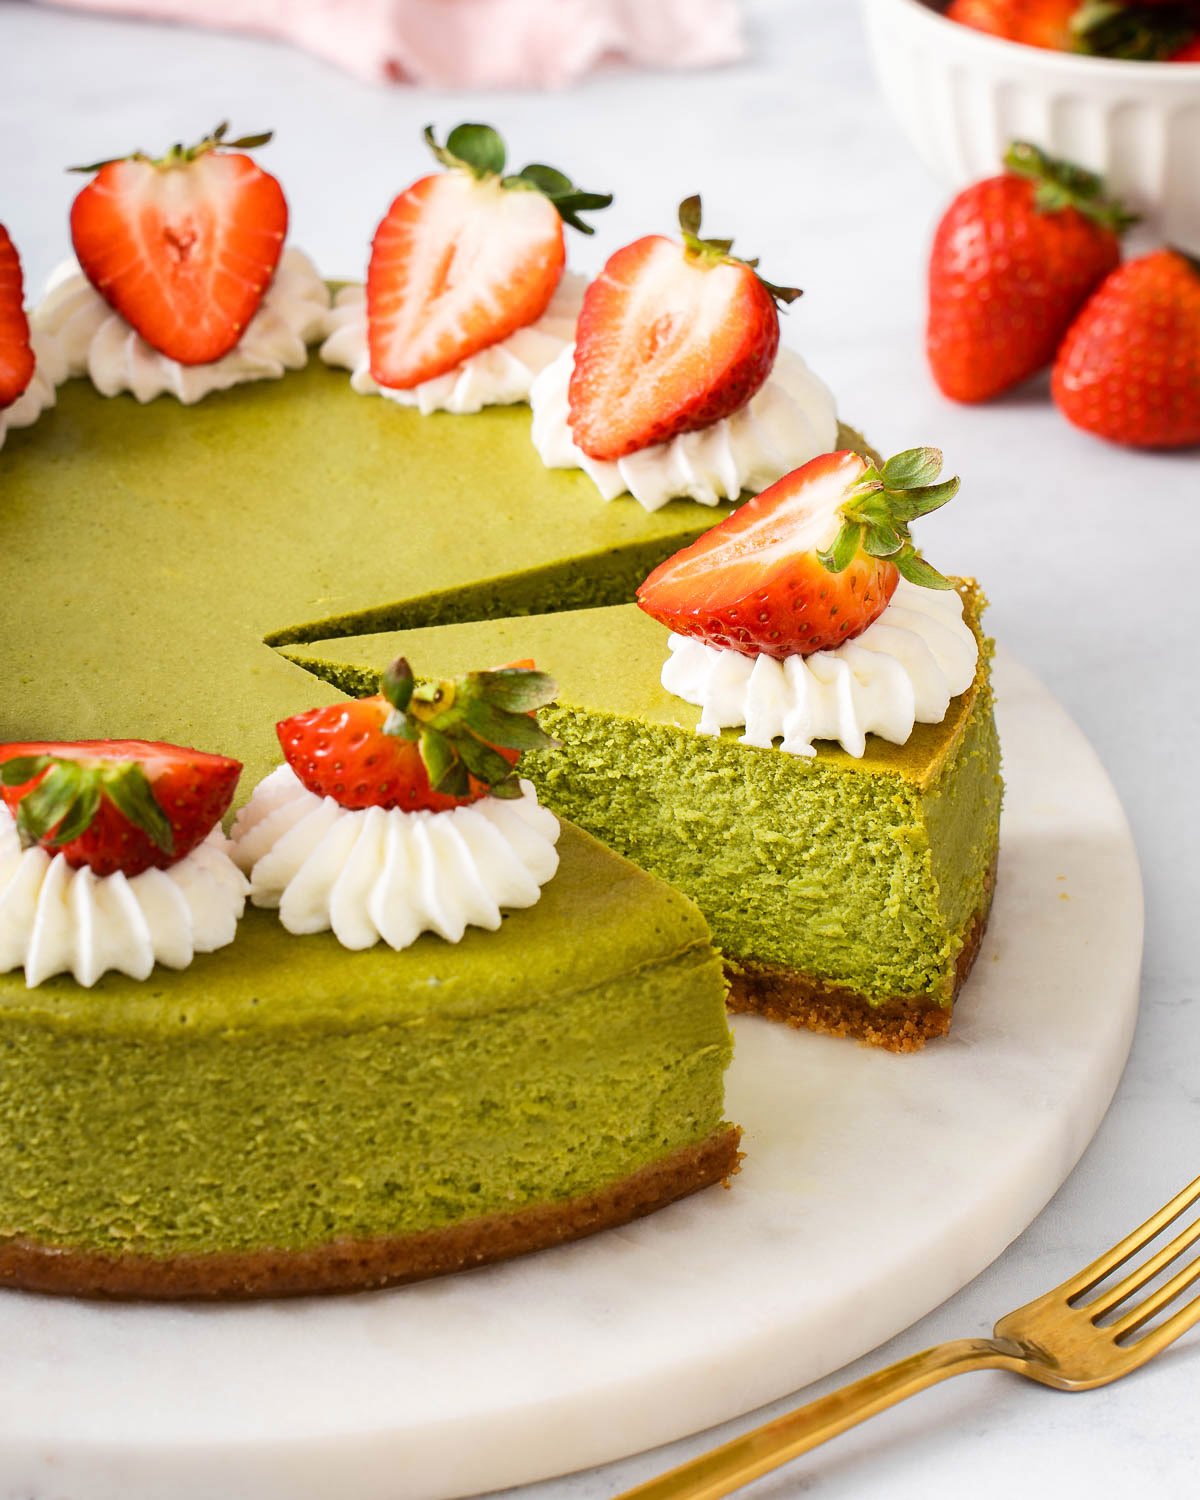 A sliced matcha cheesecake with strawberries.